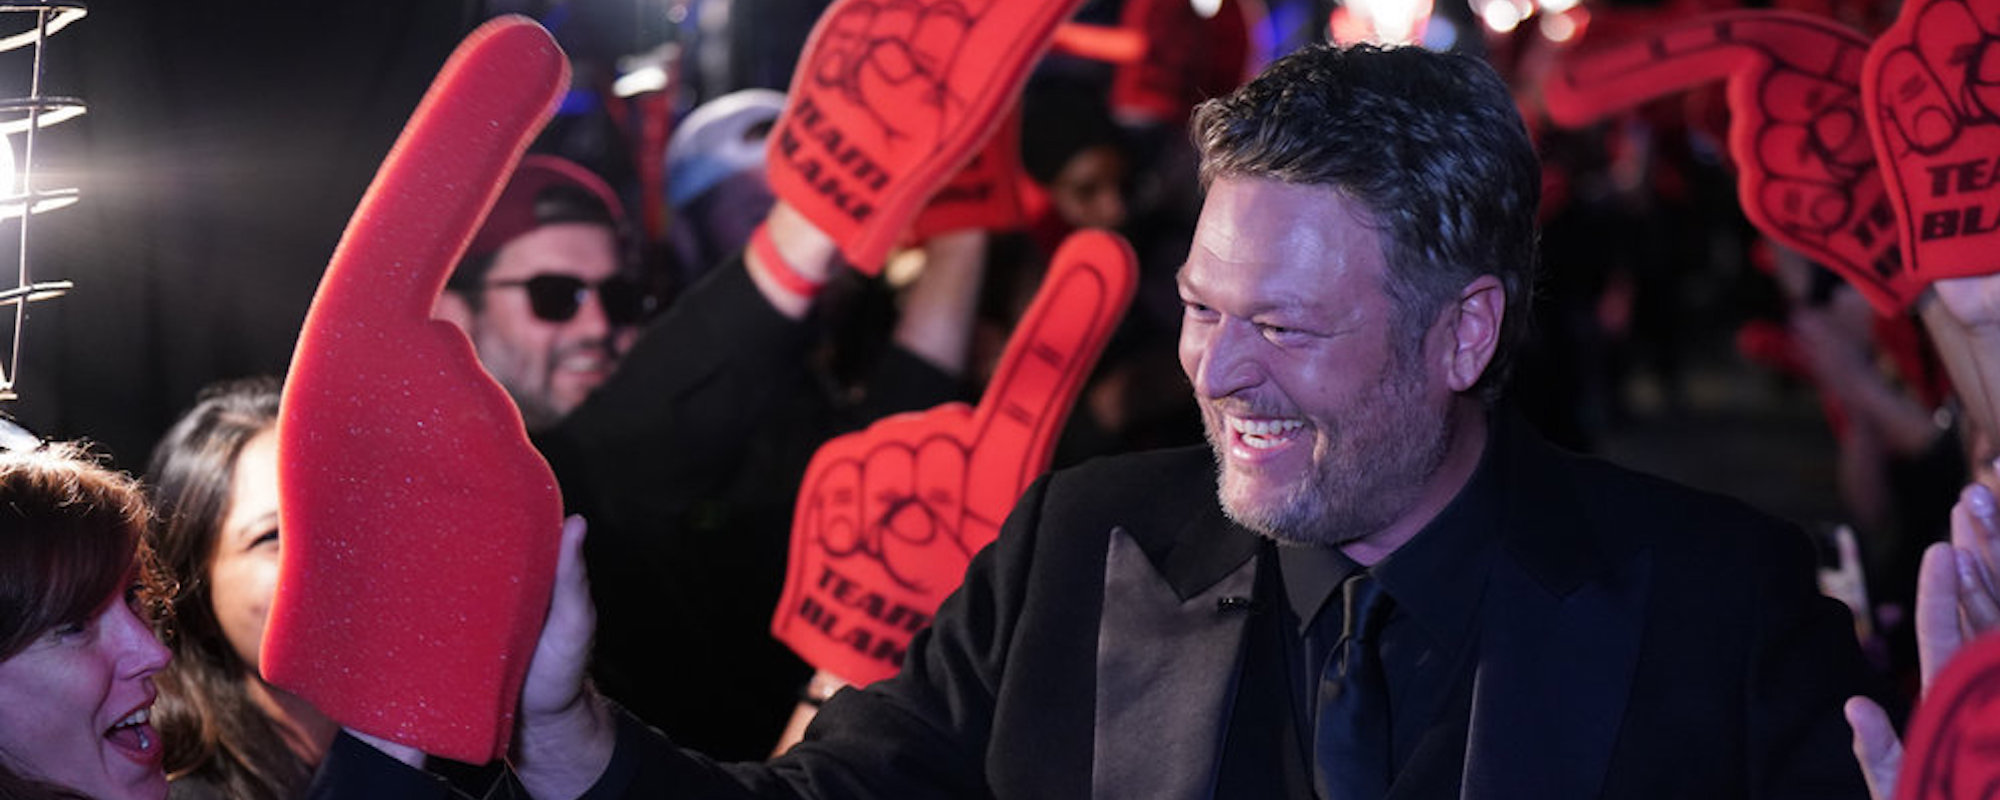 5 of Blake Shelton’s Funniest Moments on ‘The Voice’